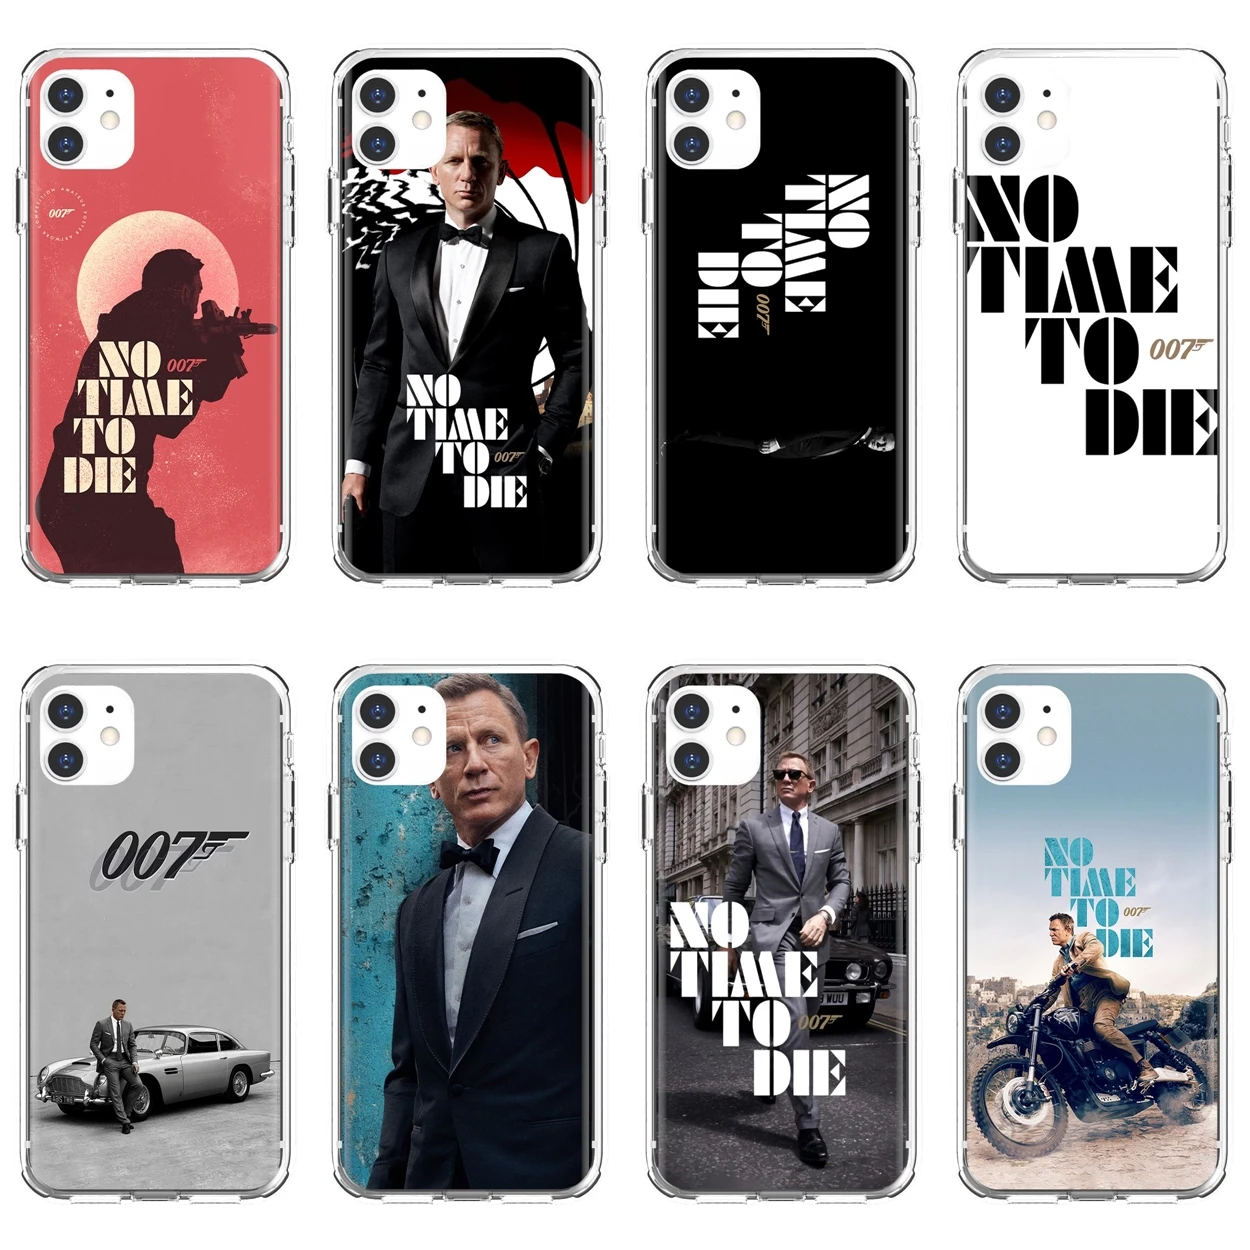 

For iPhone 10 11 12 13 Mini Pro 4S 5S SE 5C 6 6S 7 8 X XR XS Plus Max 2020 Silicone Case 007 James Bond No Time to Die